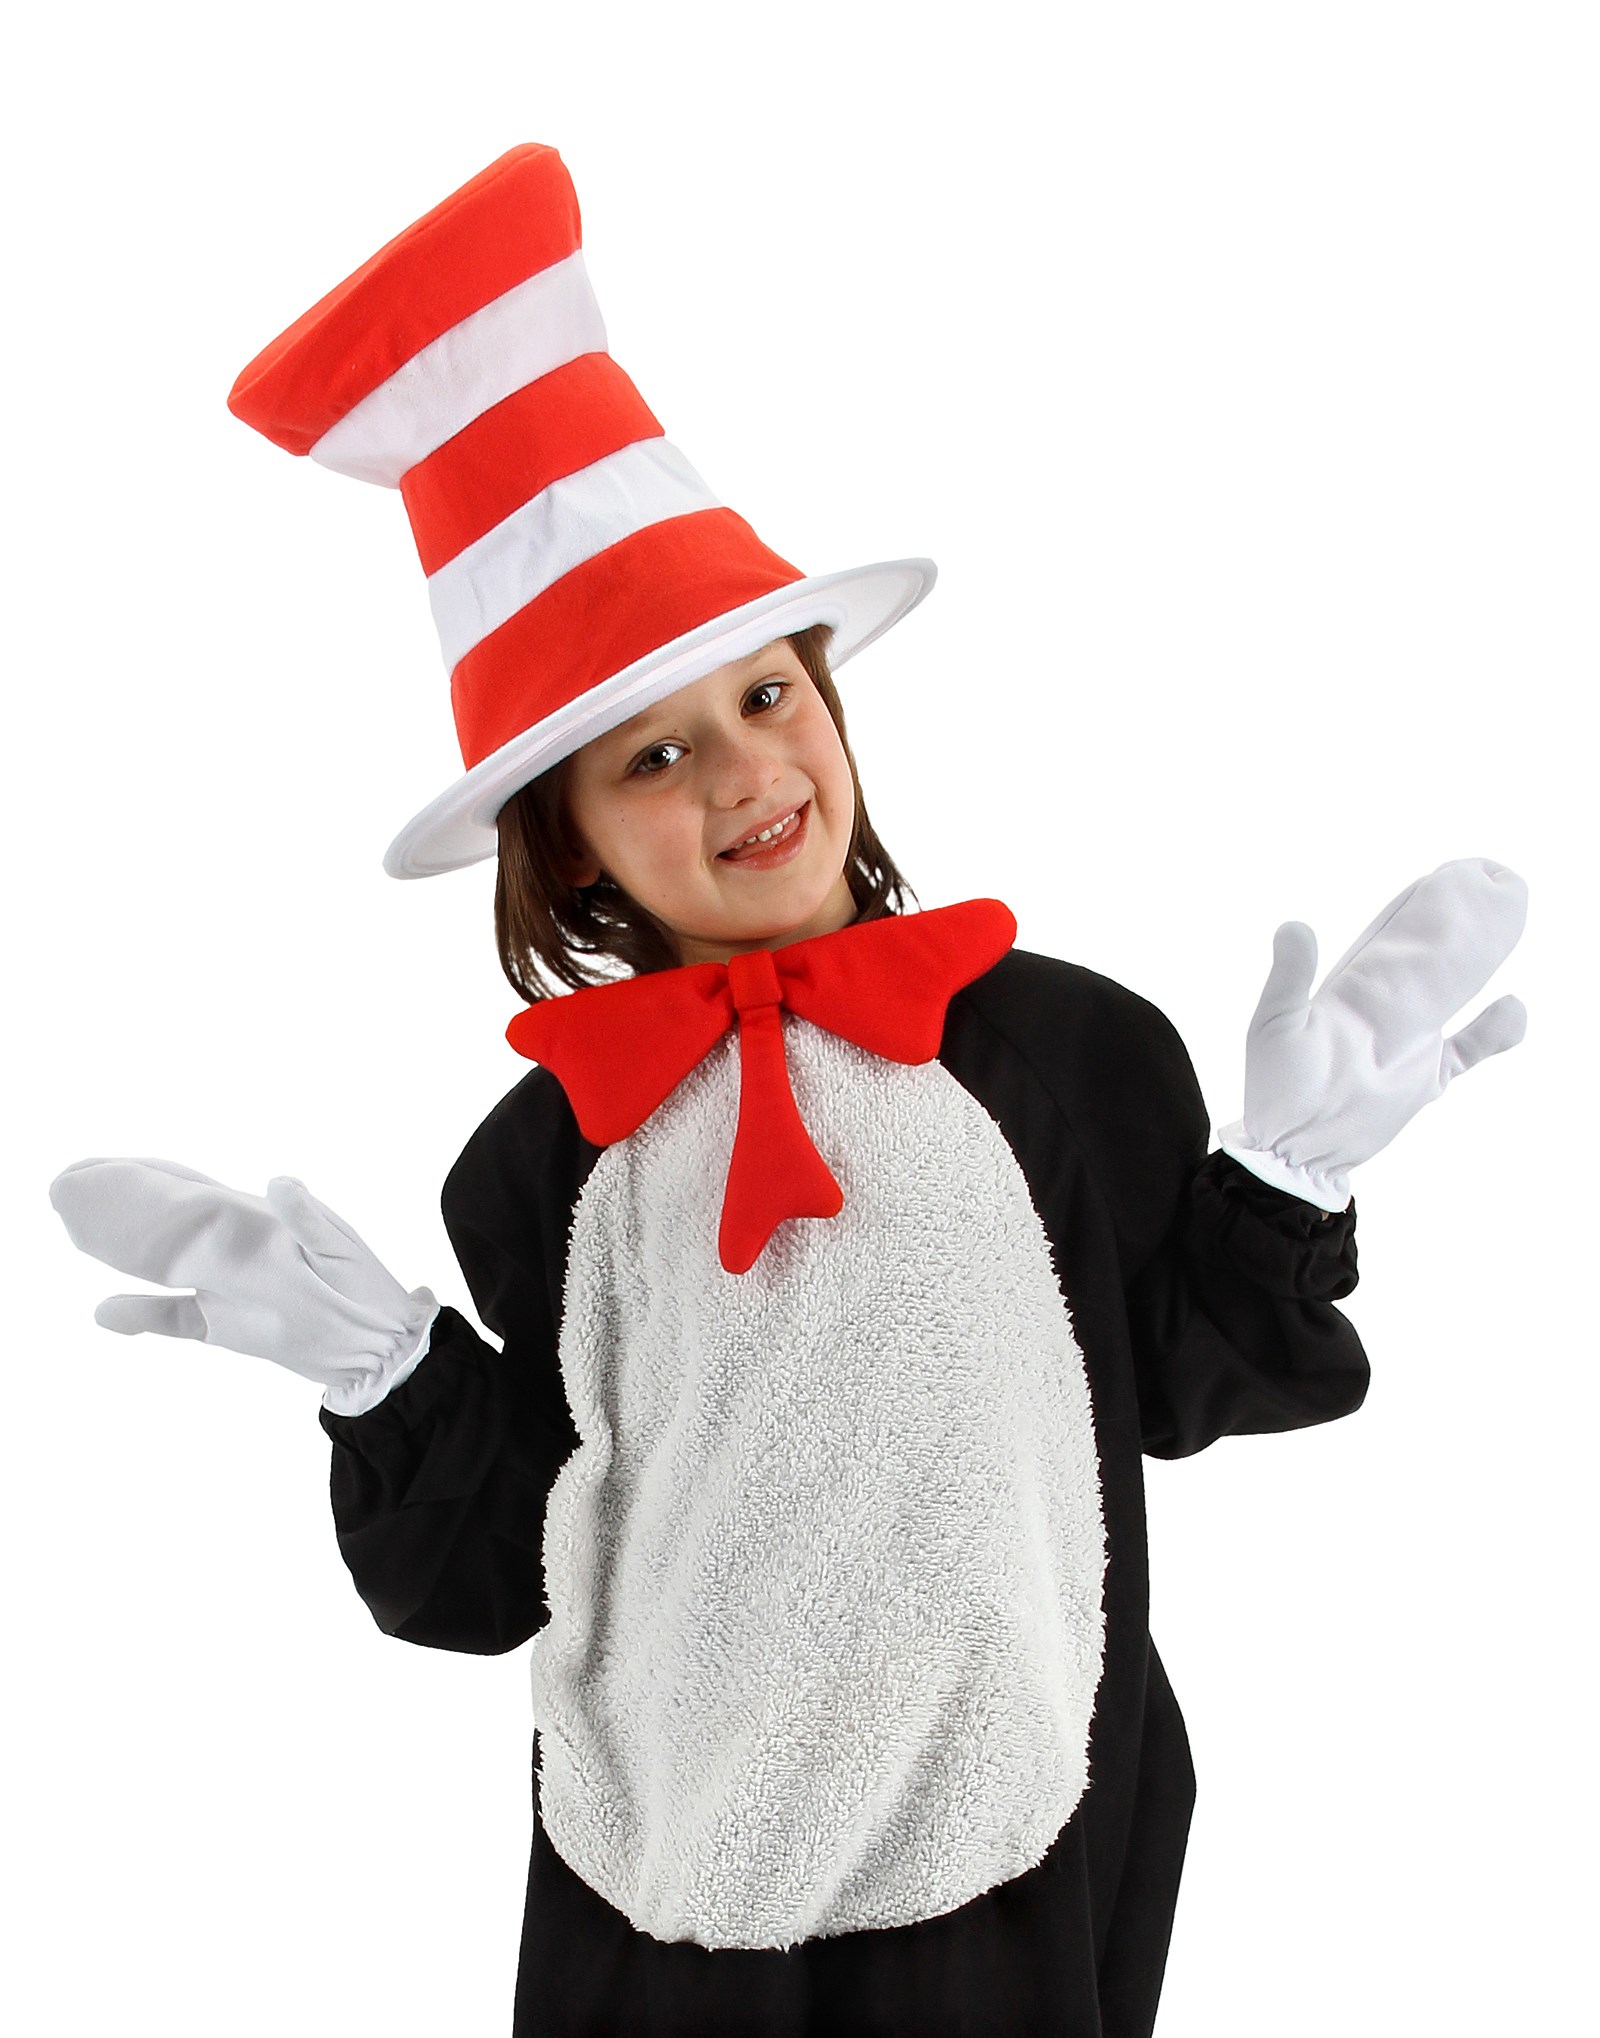 Dr. Seuss The Cat in the Hat - The Cat in the Hat Accessory Kit Child